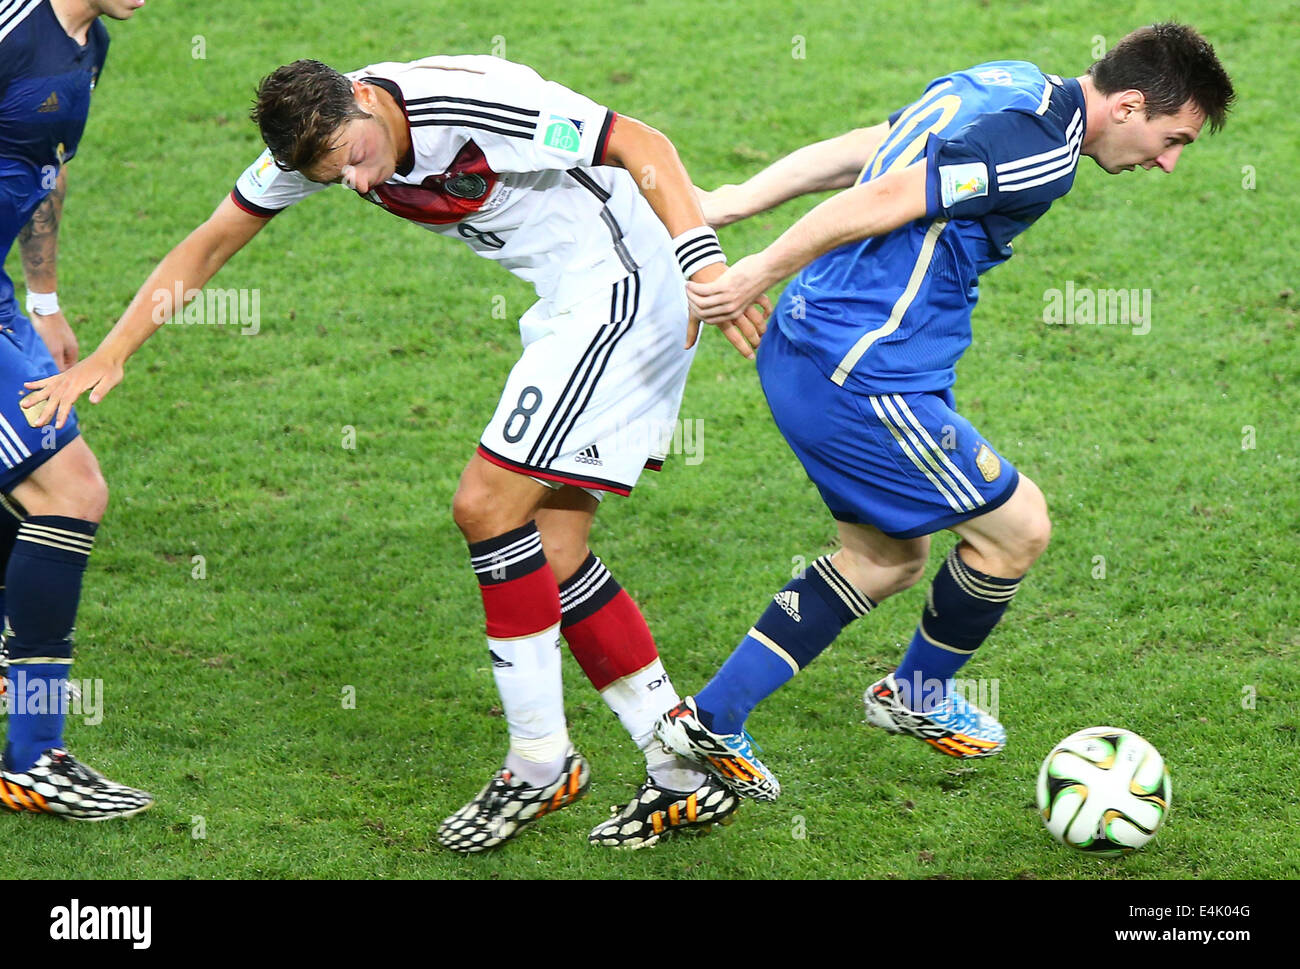 Rio De Janeiro, Brazil. 13th July, 2014. Germany's Mesut Ozil vies with Argentina's Lionel Messi during the final match between Germany and Argentina of 2014 FIFA World Cup at the Estadio do Maracana Stadium in Rio de Janeiro, Brazil, on July 13, 2014. Credit:  Chen Jianli/Xinhua/Alamy Live News Stock Photo